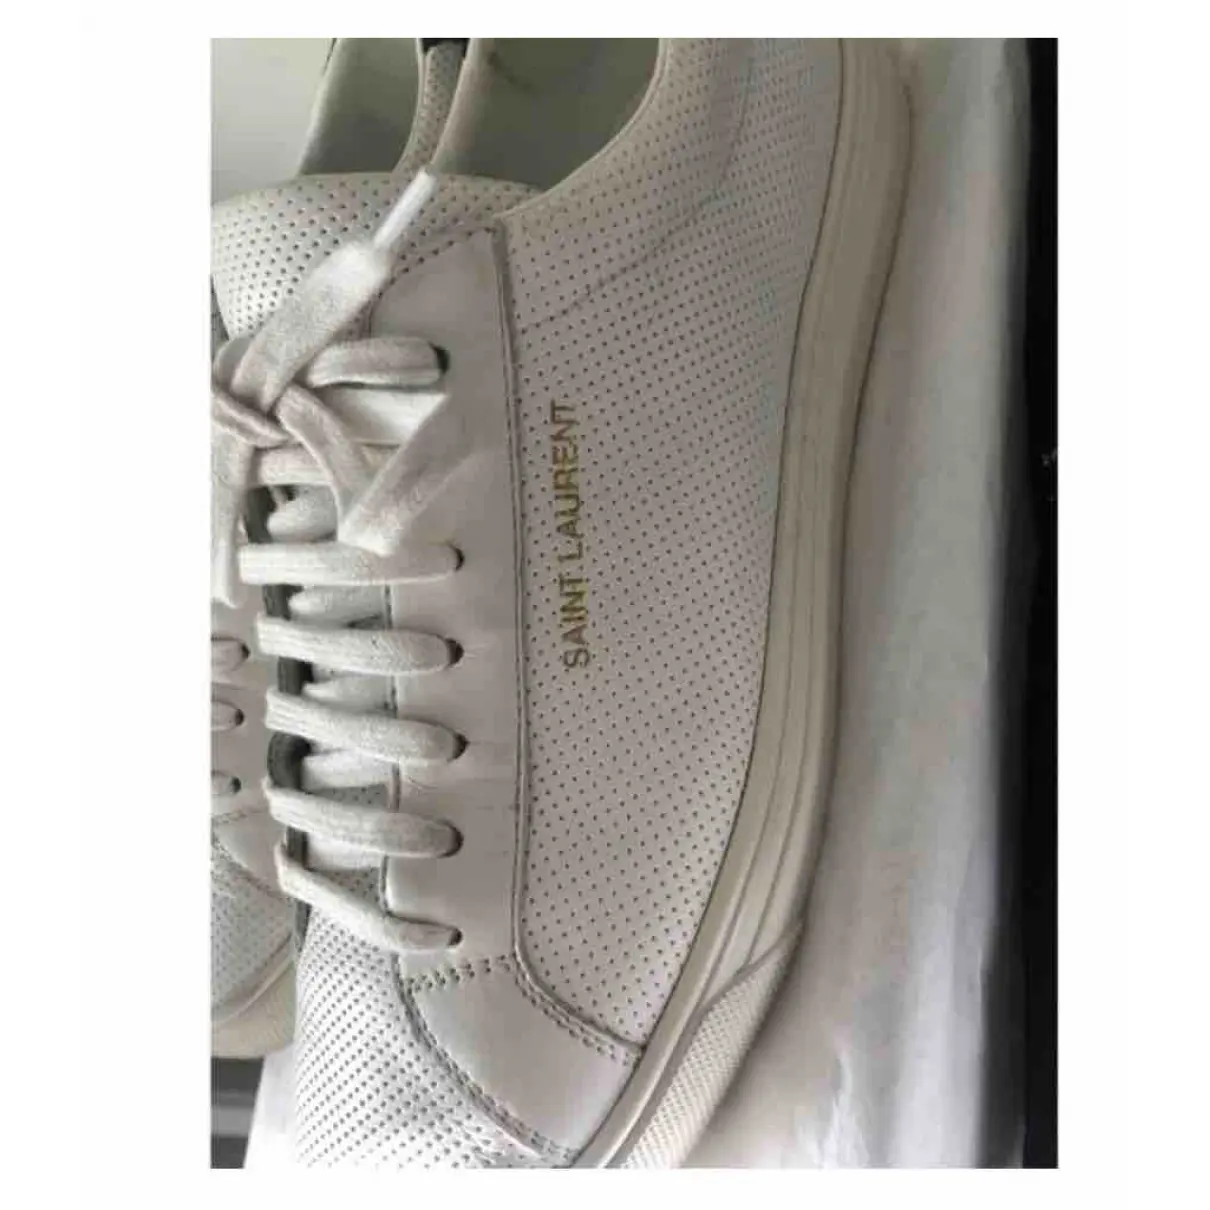 Andy leather trainers Saint Laurent